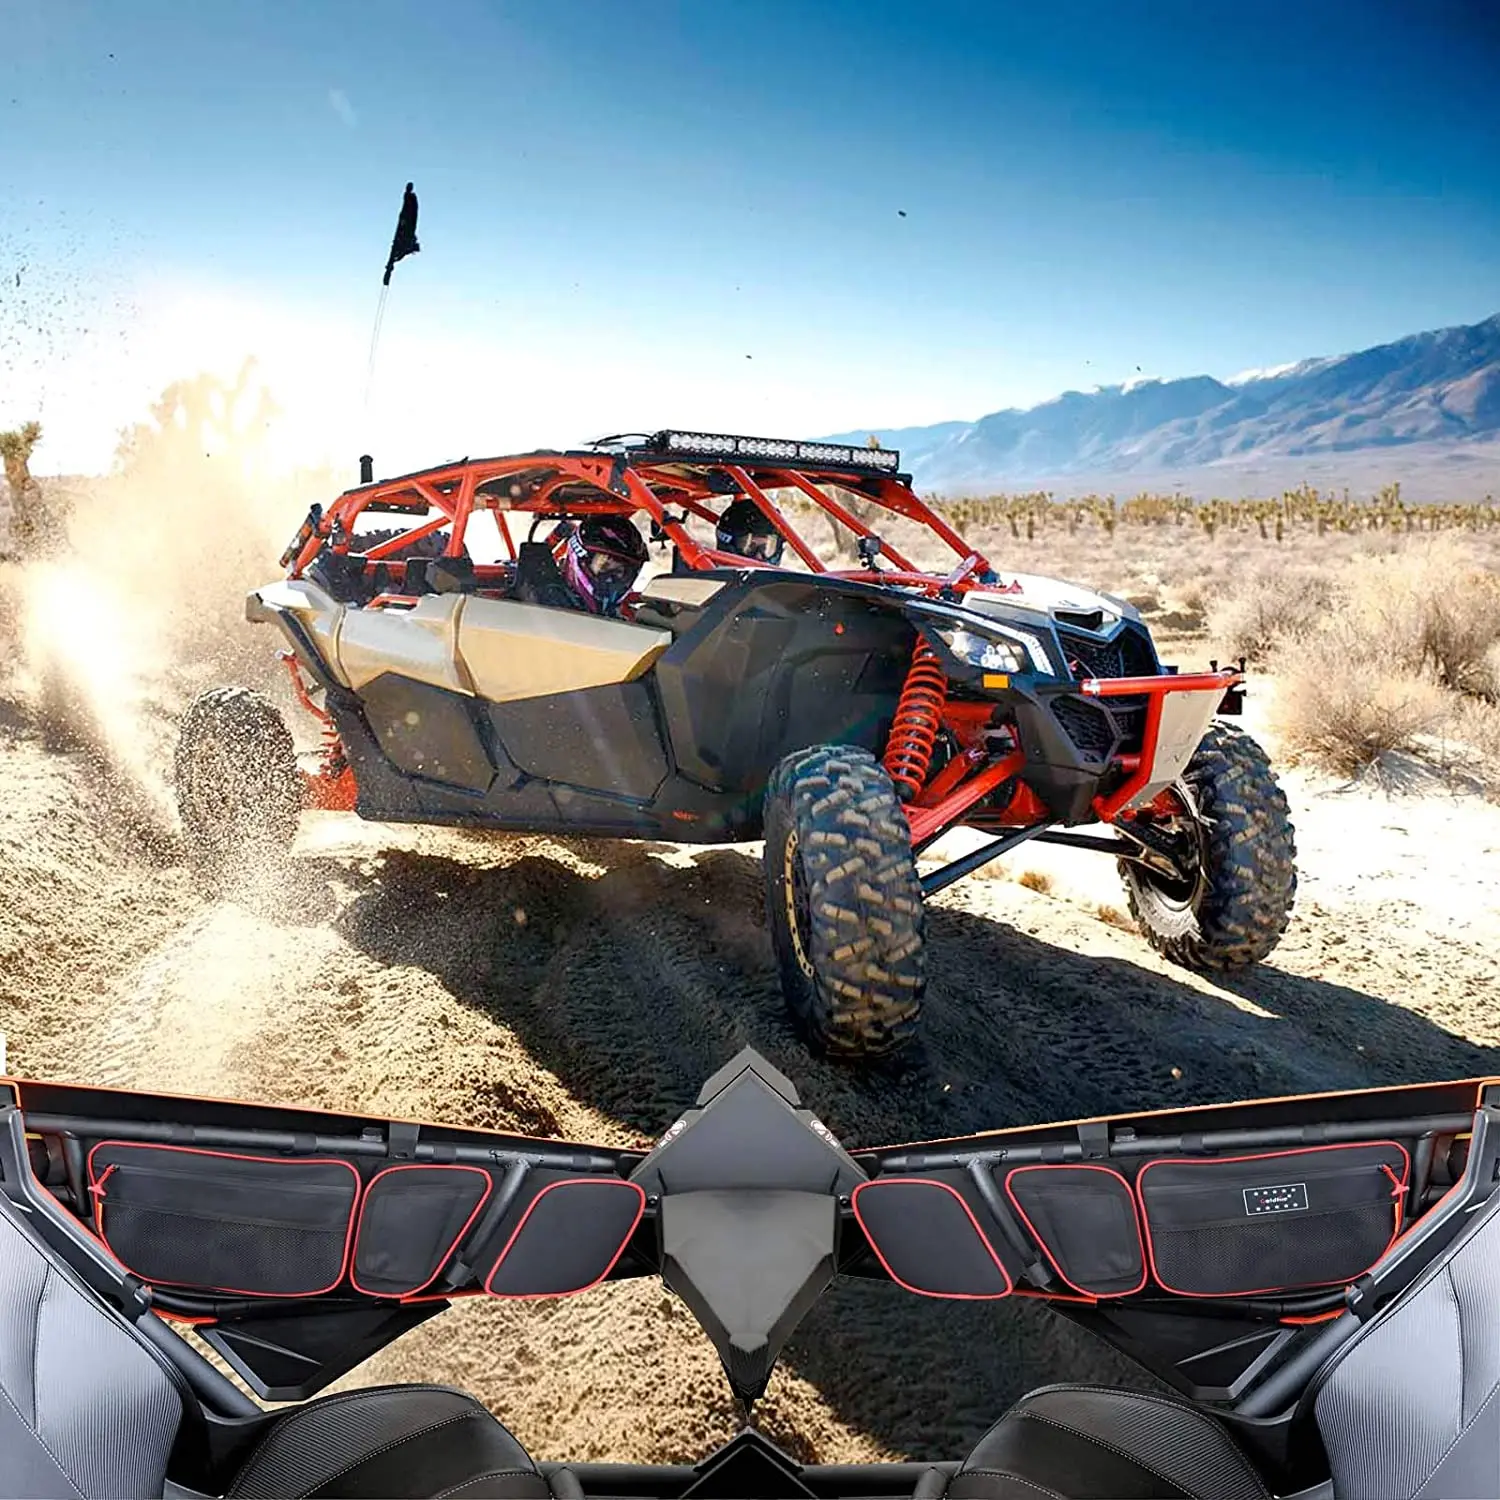 Maverick X3 Accessories Maverick X3 Front Upper Door Bags Fits For Can Am Maverick X3 XDS XDS Turbo R with Removable Knee Pad